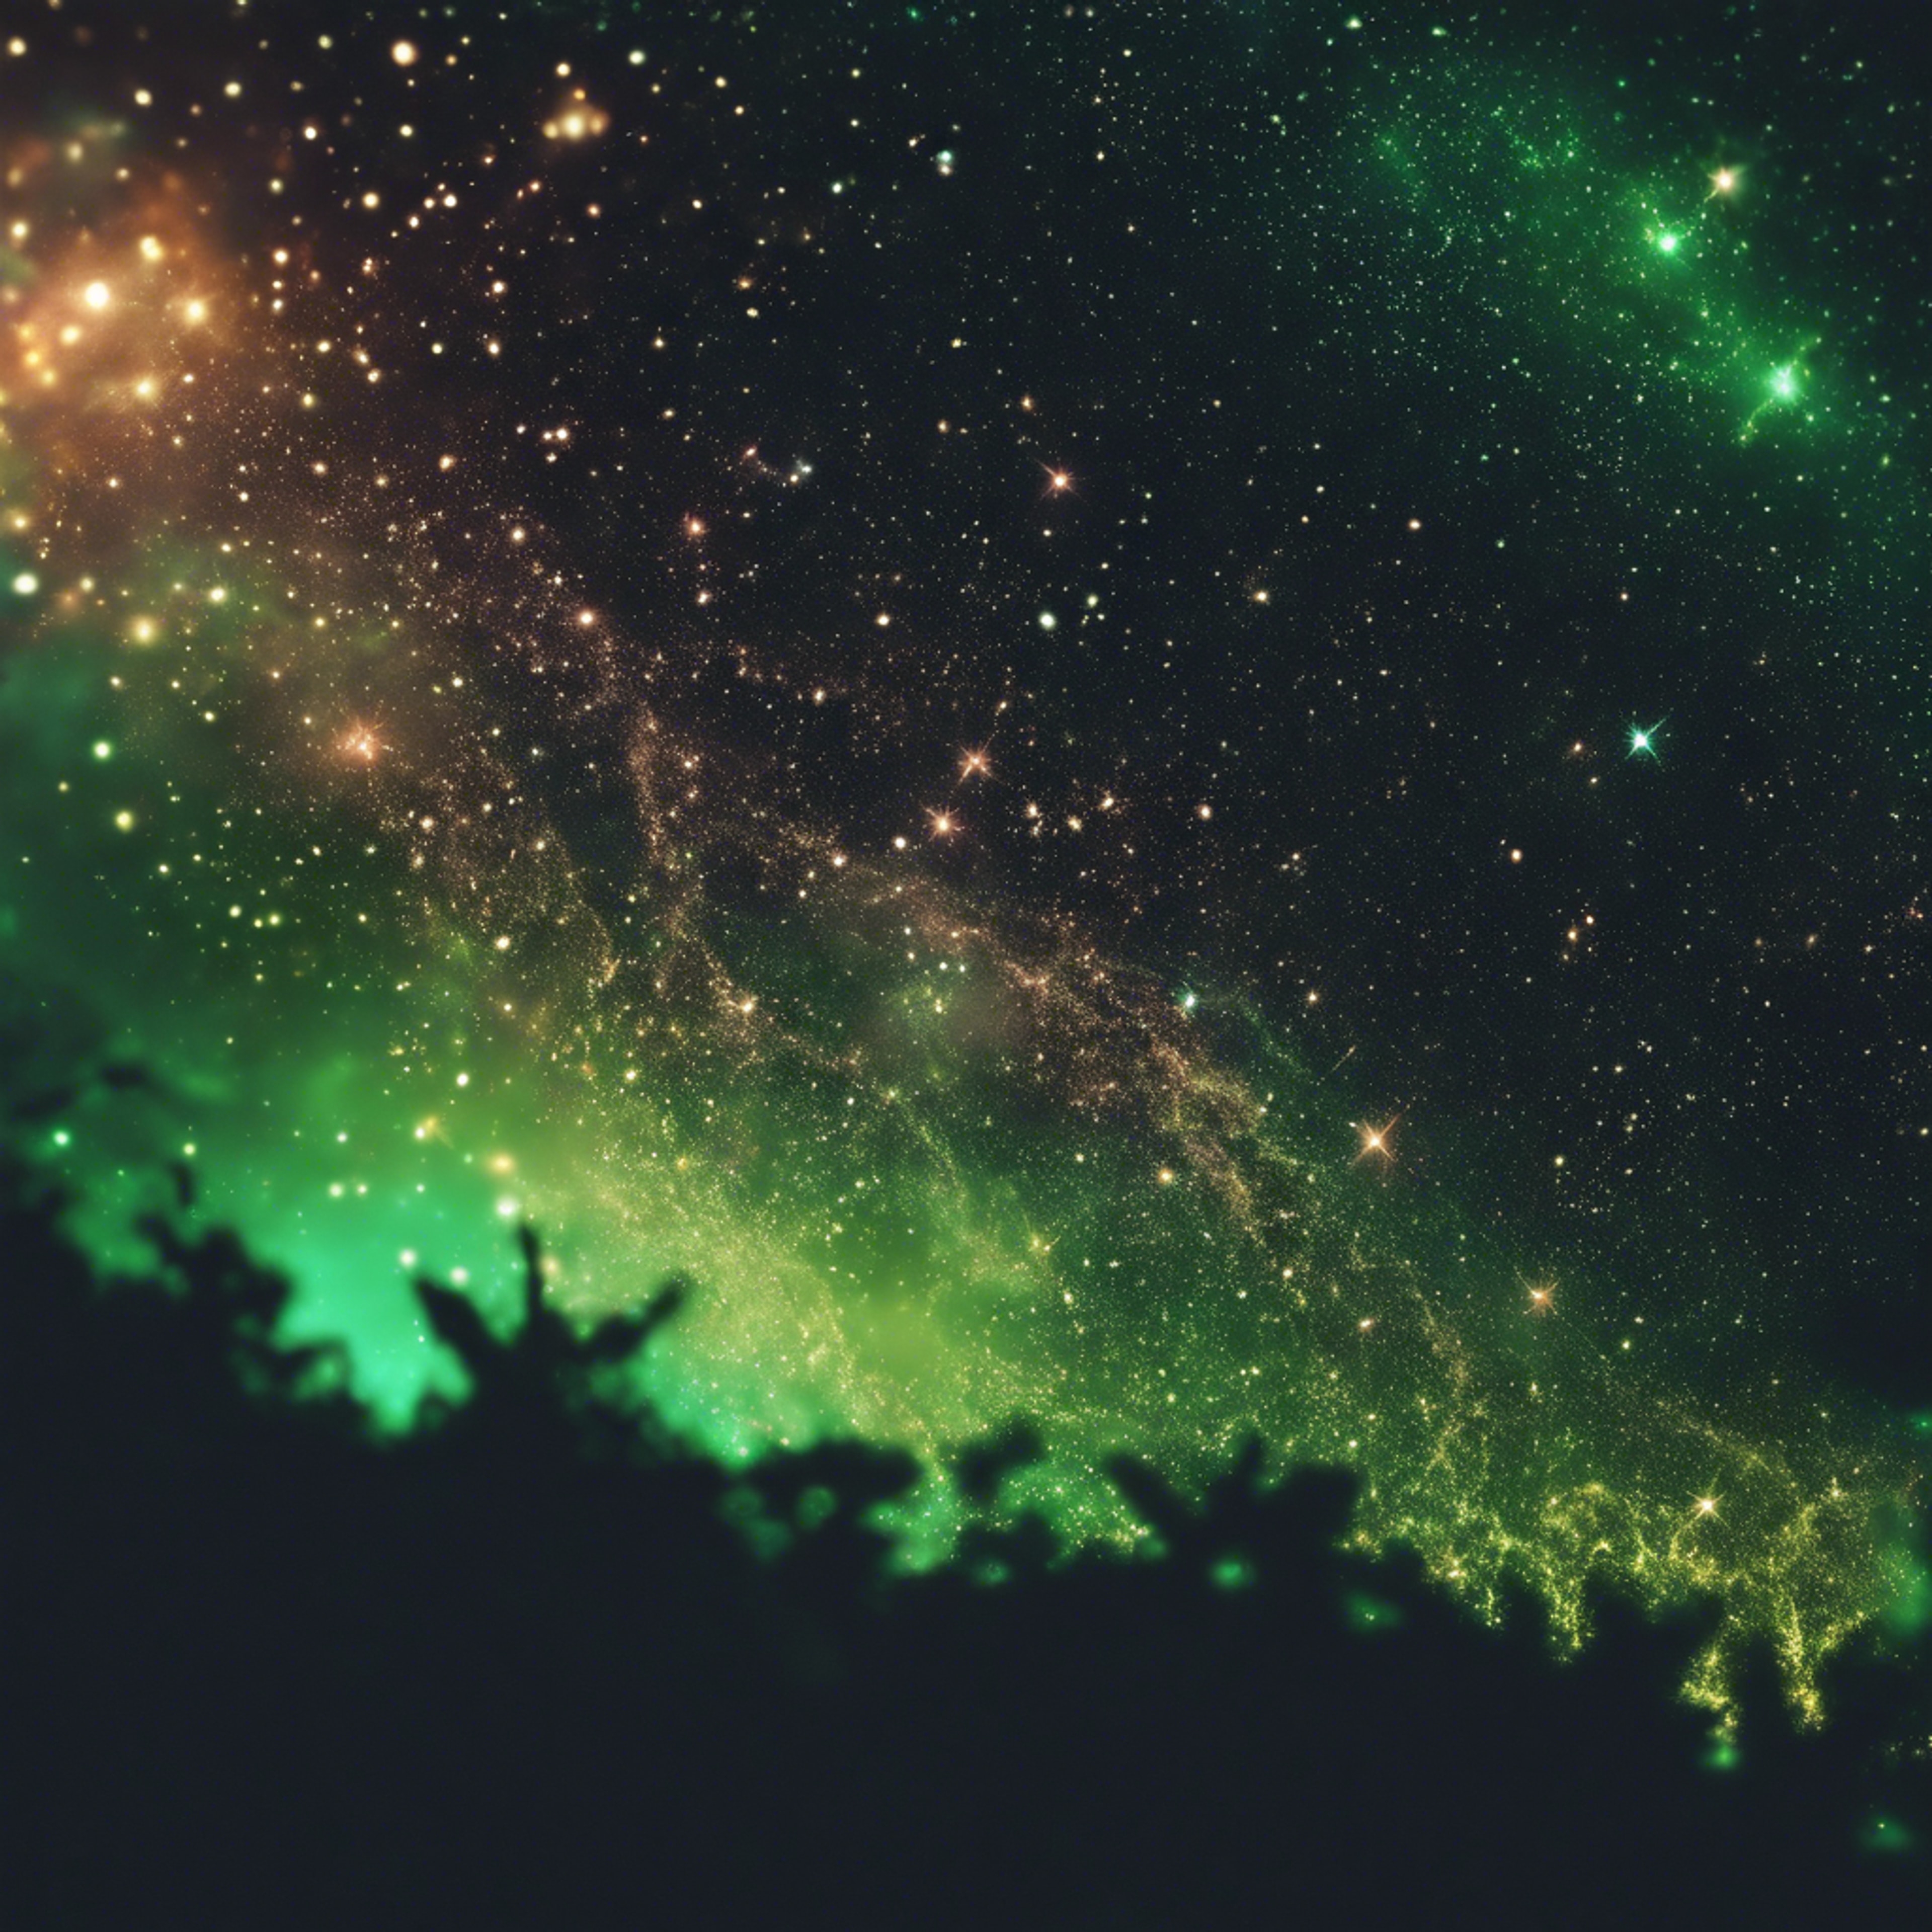 A galaxy seen from the edge of the universe, with cool neon green stars sparking in the darkness.壁紙[23da465cd95e430a971e]